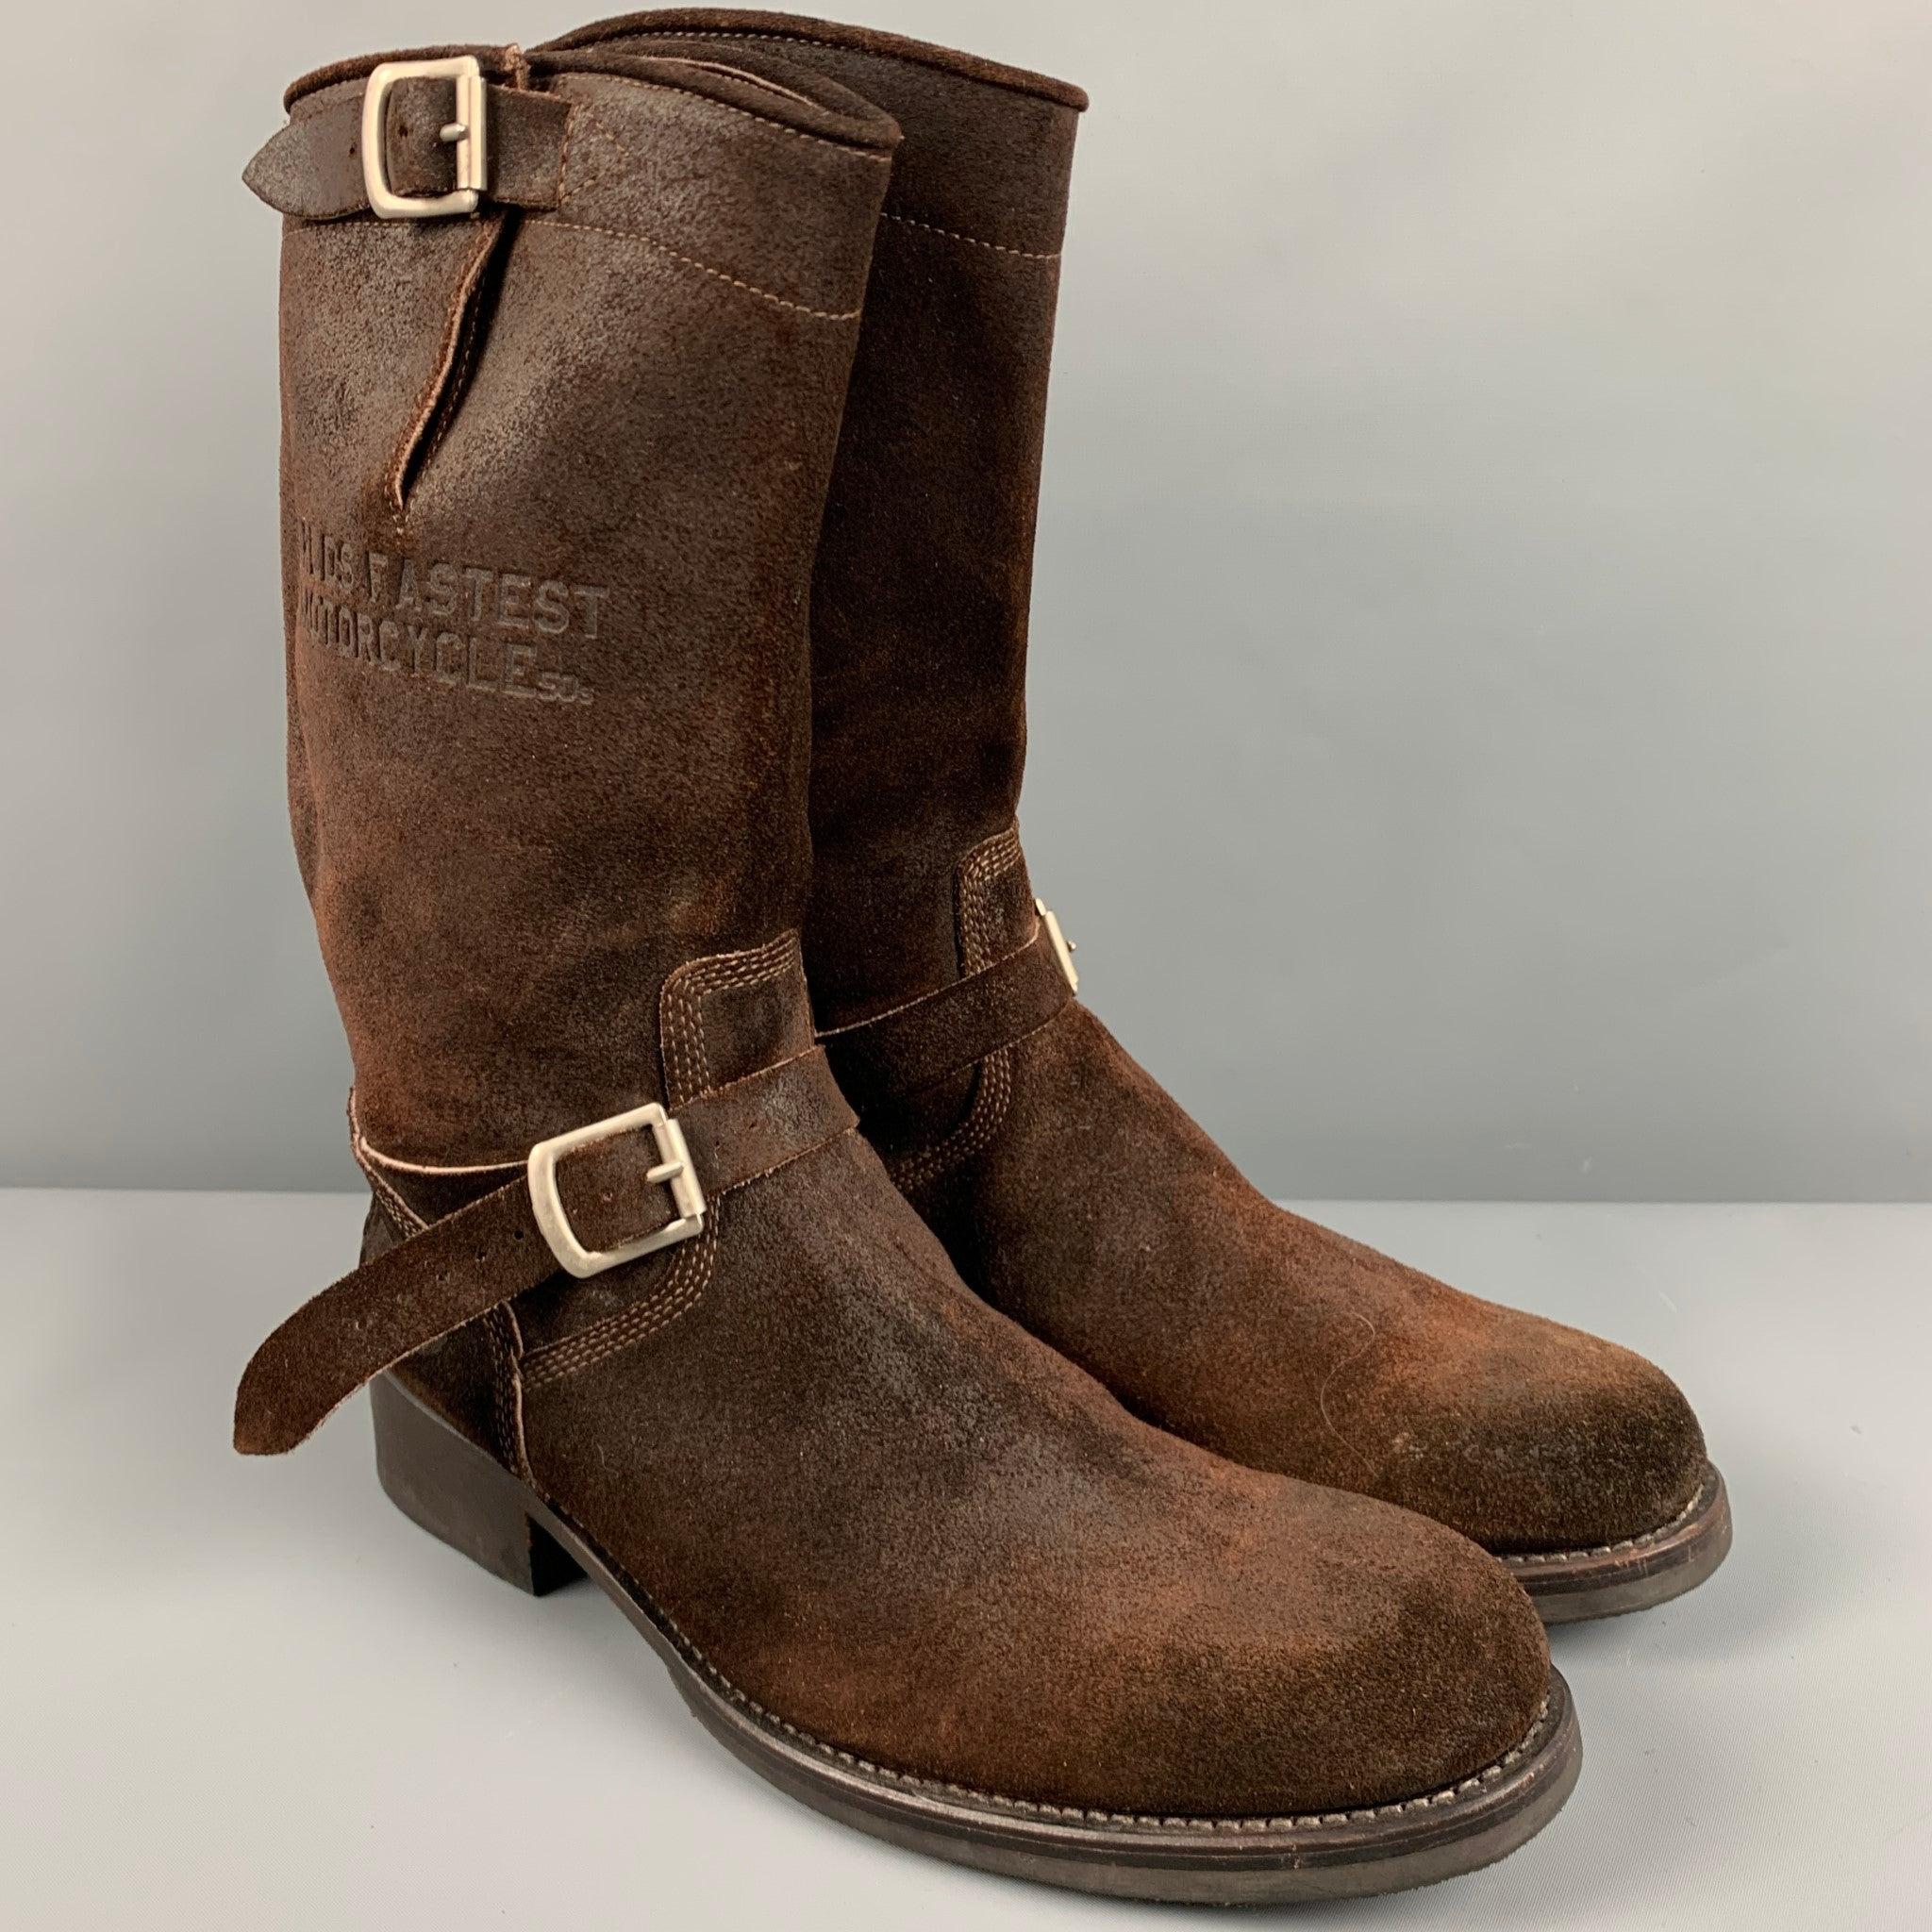 TRIUMPH by PAUL SMITH boots
in a brown leather fabric featuring pull on style, embossed text, silver tone buckles, and heavy duty soles. Made in Italy.Very Good Pre-Owned Condition. 

Marked:   3461 42 8 

Measurements: 
  Length: 12 inches Width: